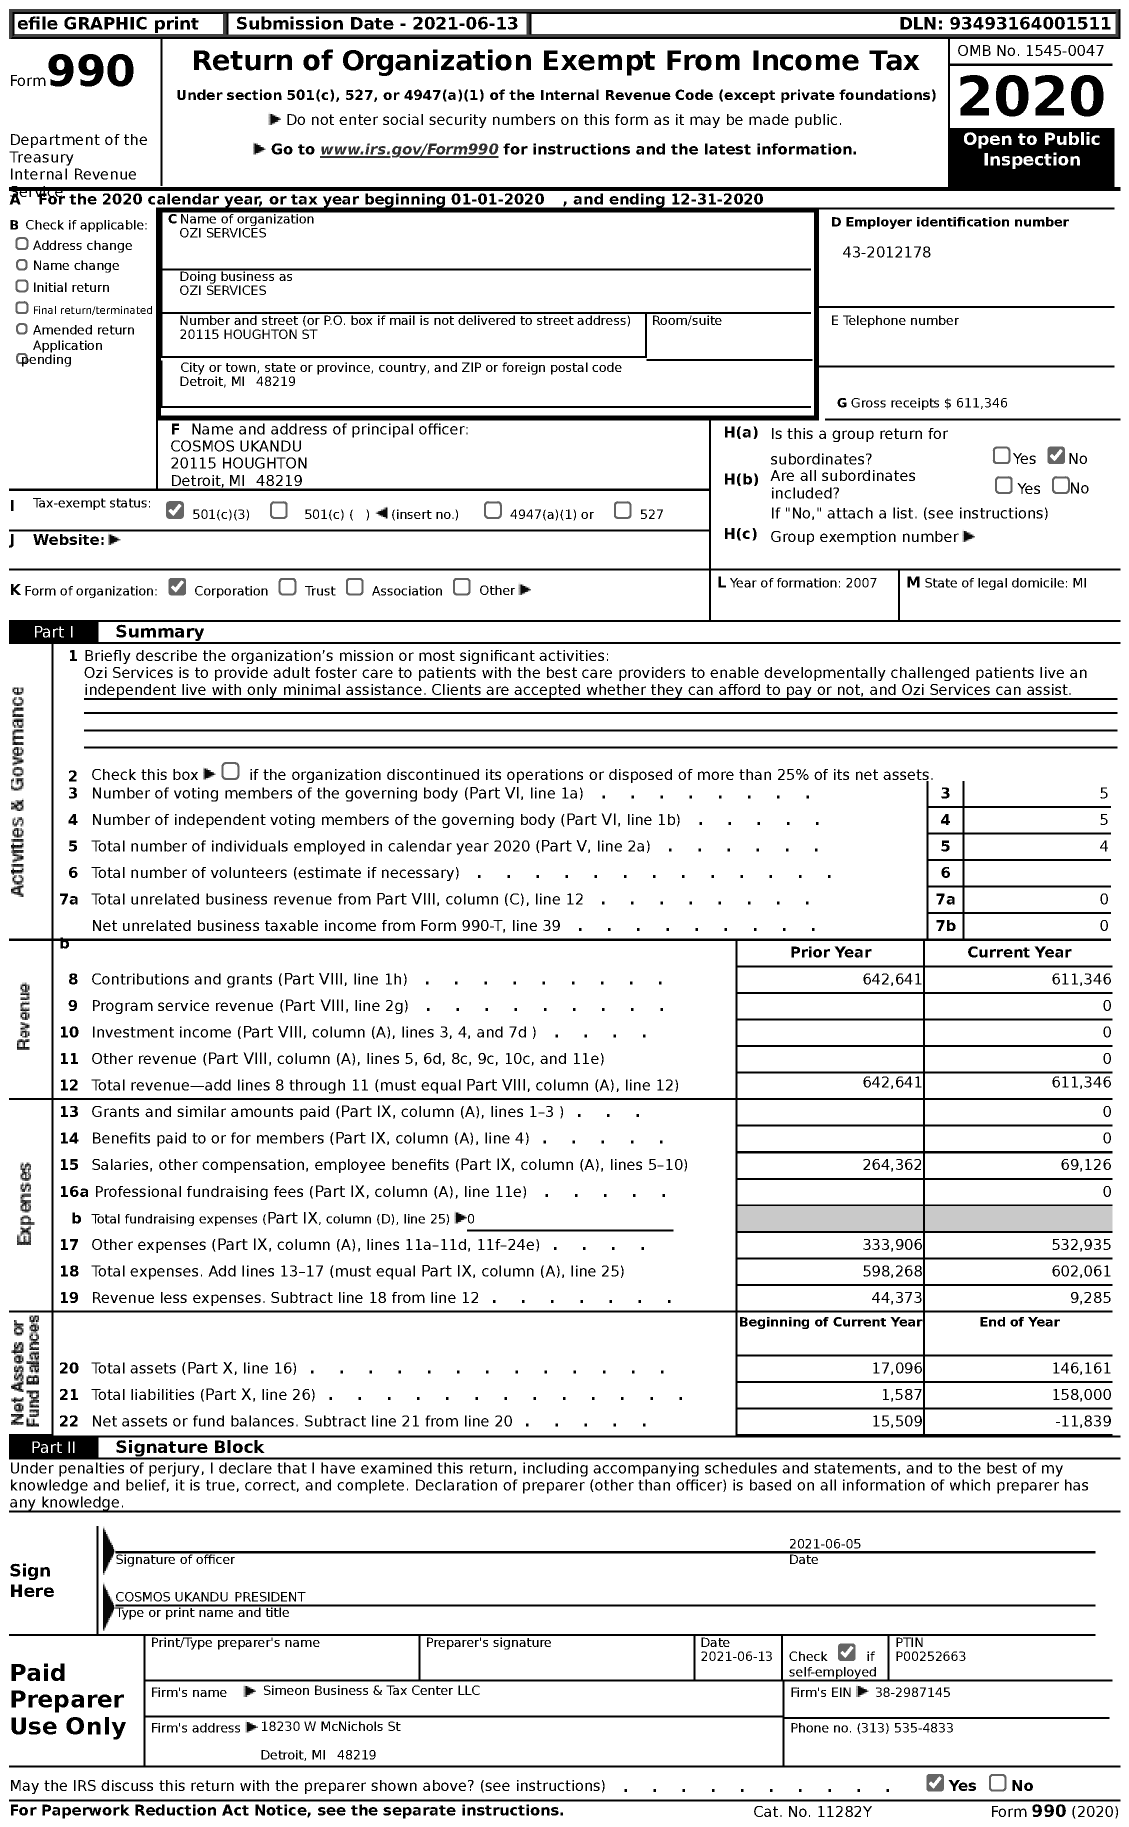 Image of first page of 2020 Form 990 for Ozi Services (OSI)